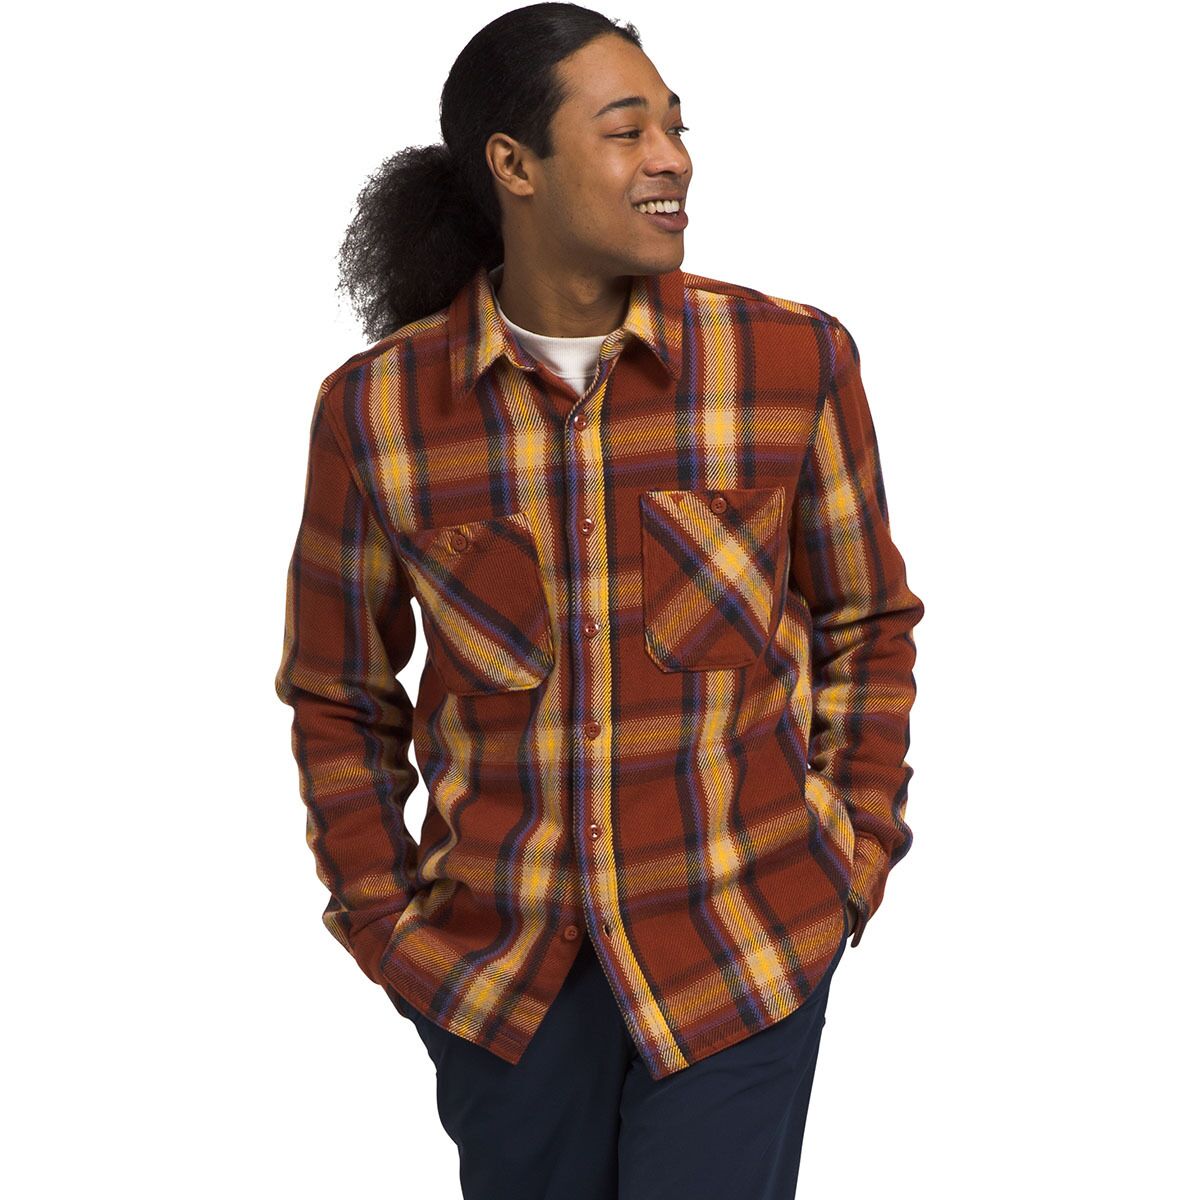 The North Face Valley Twill Flannel Shirt - Men's